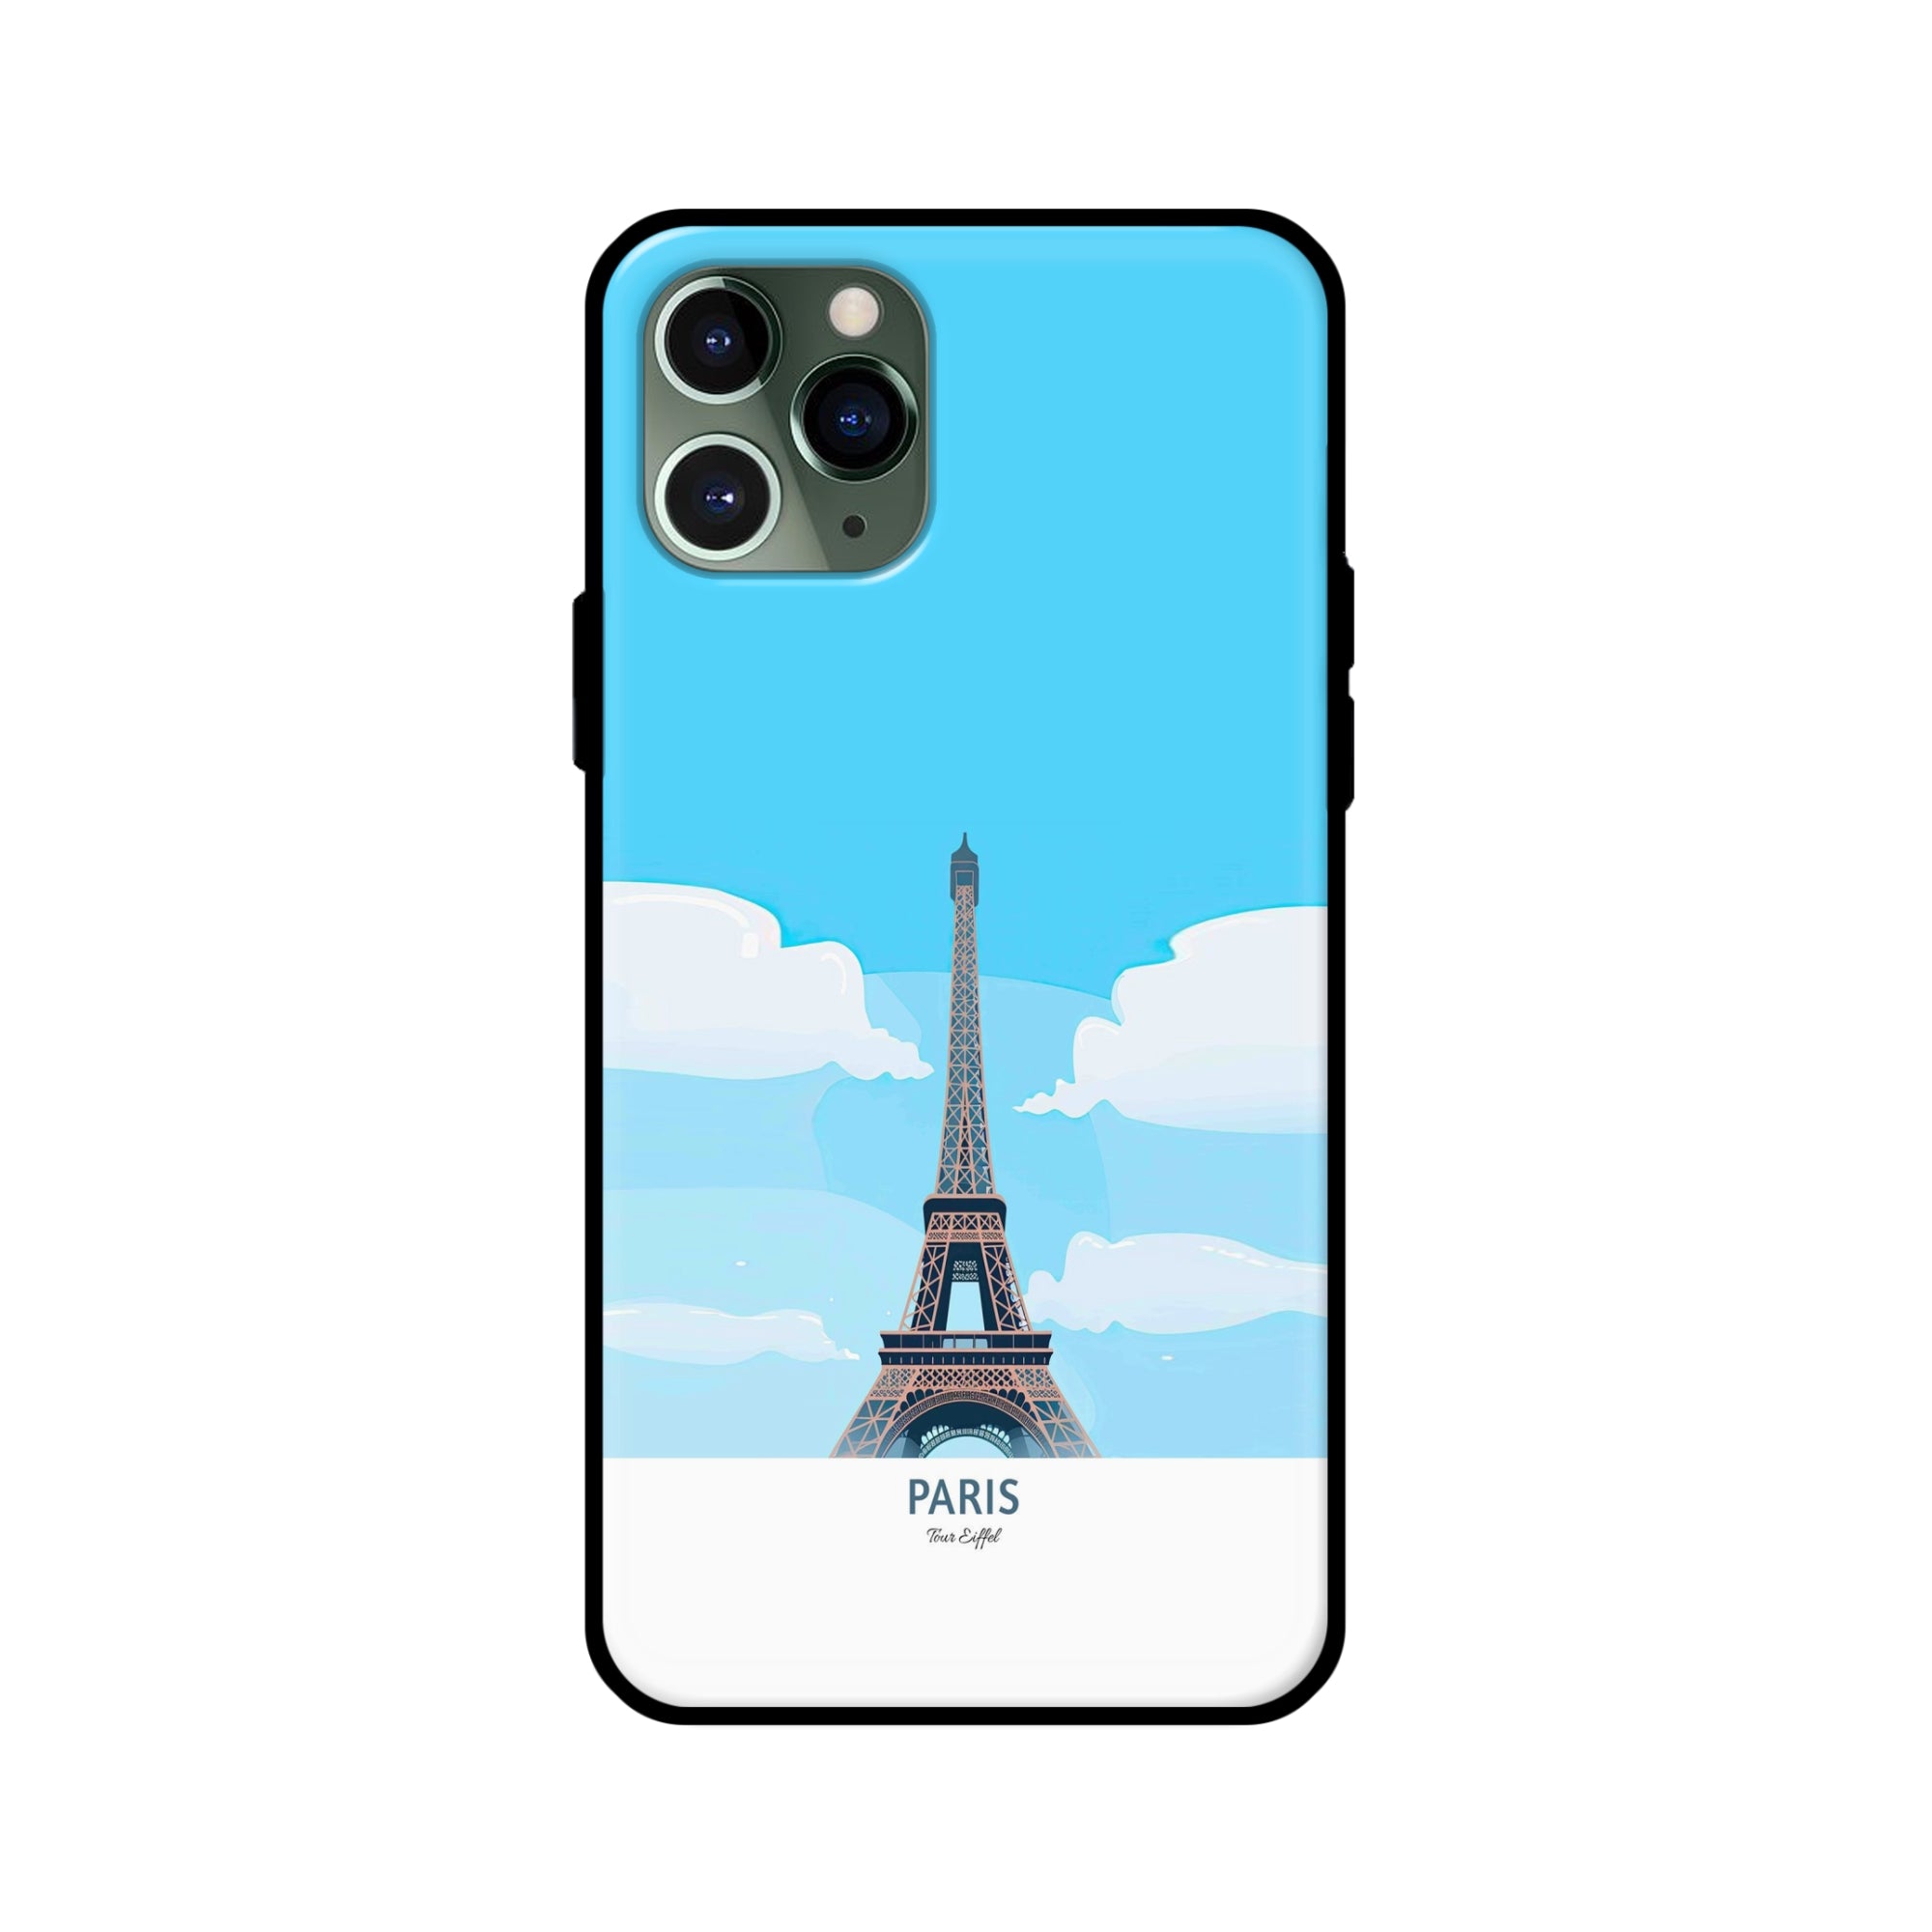 Buy Paris Glass/Metal Back Mobile Phone Case/Cover For iPhone 11 Pro Online